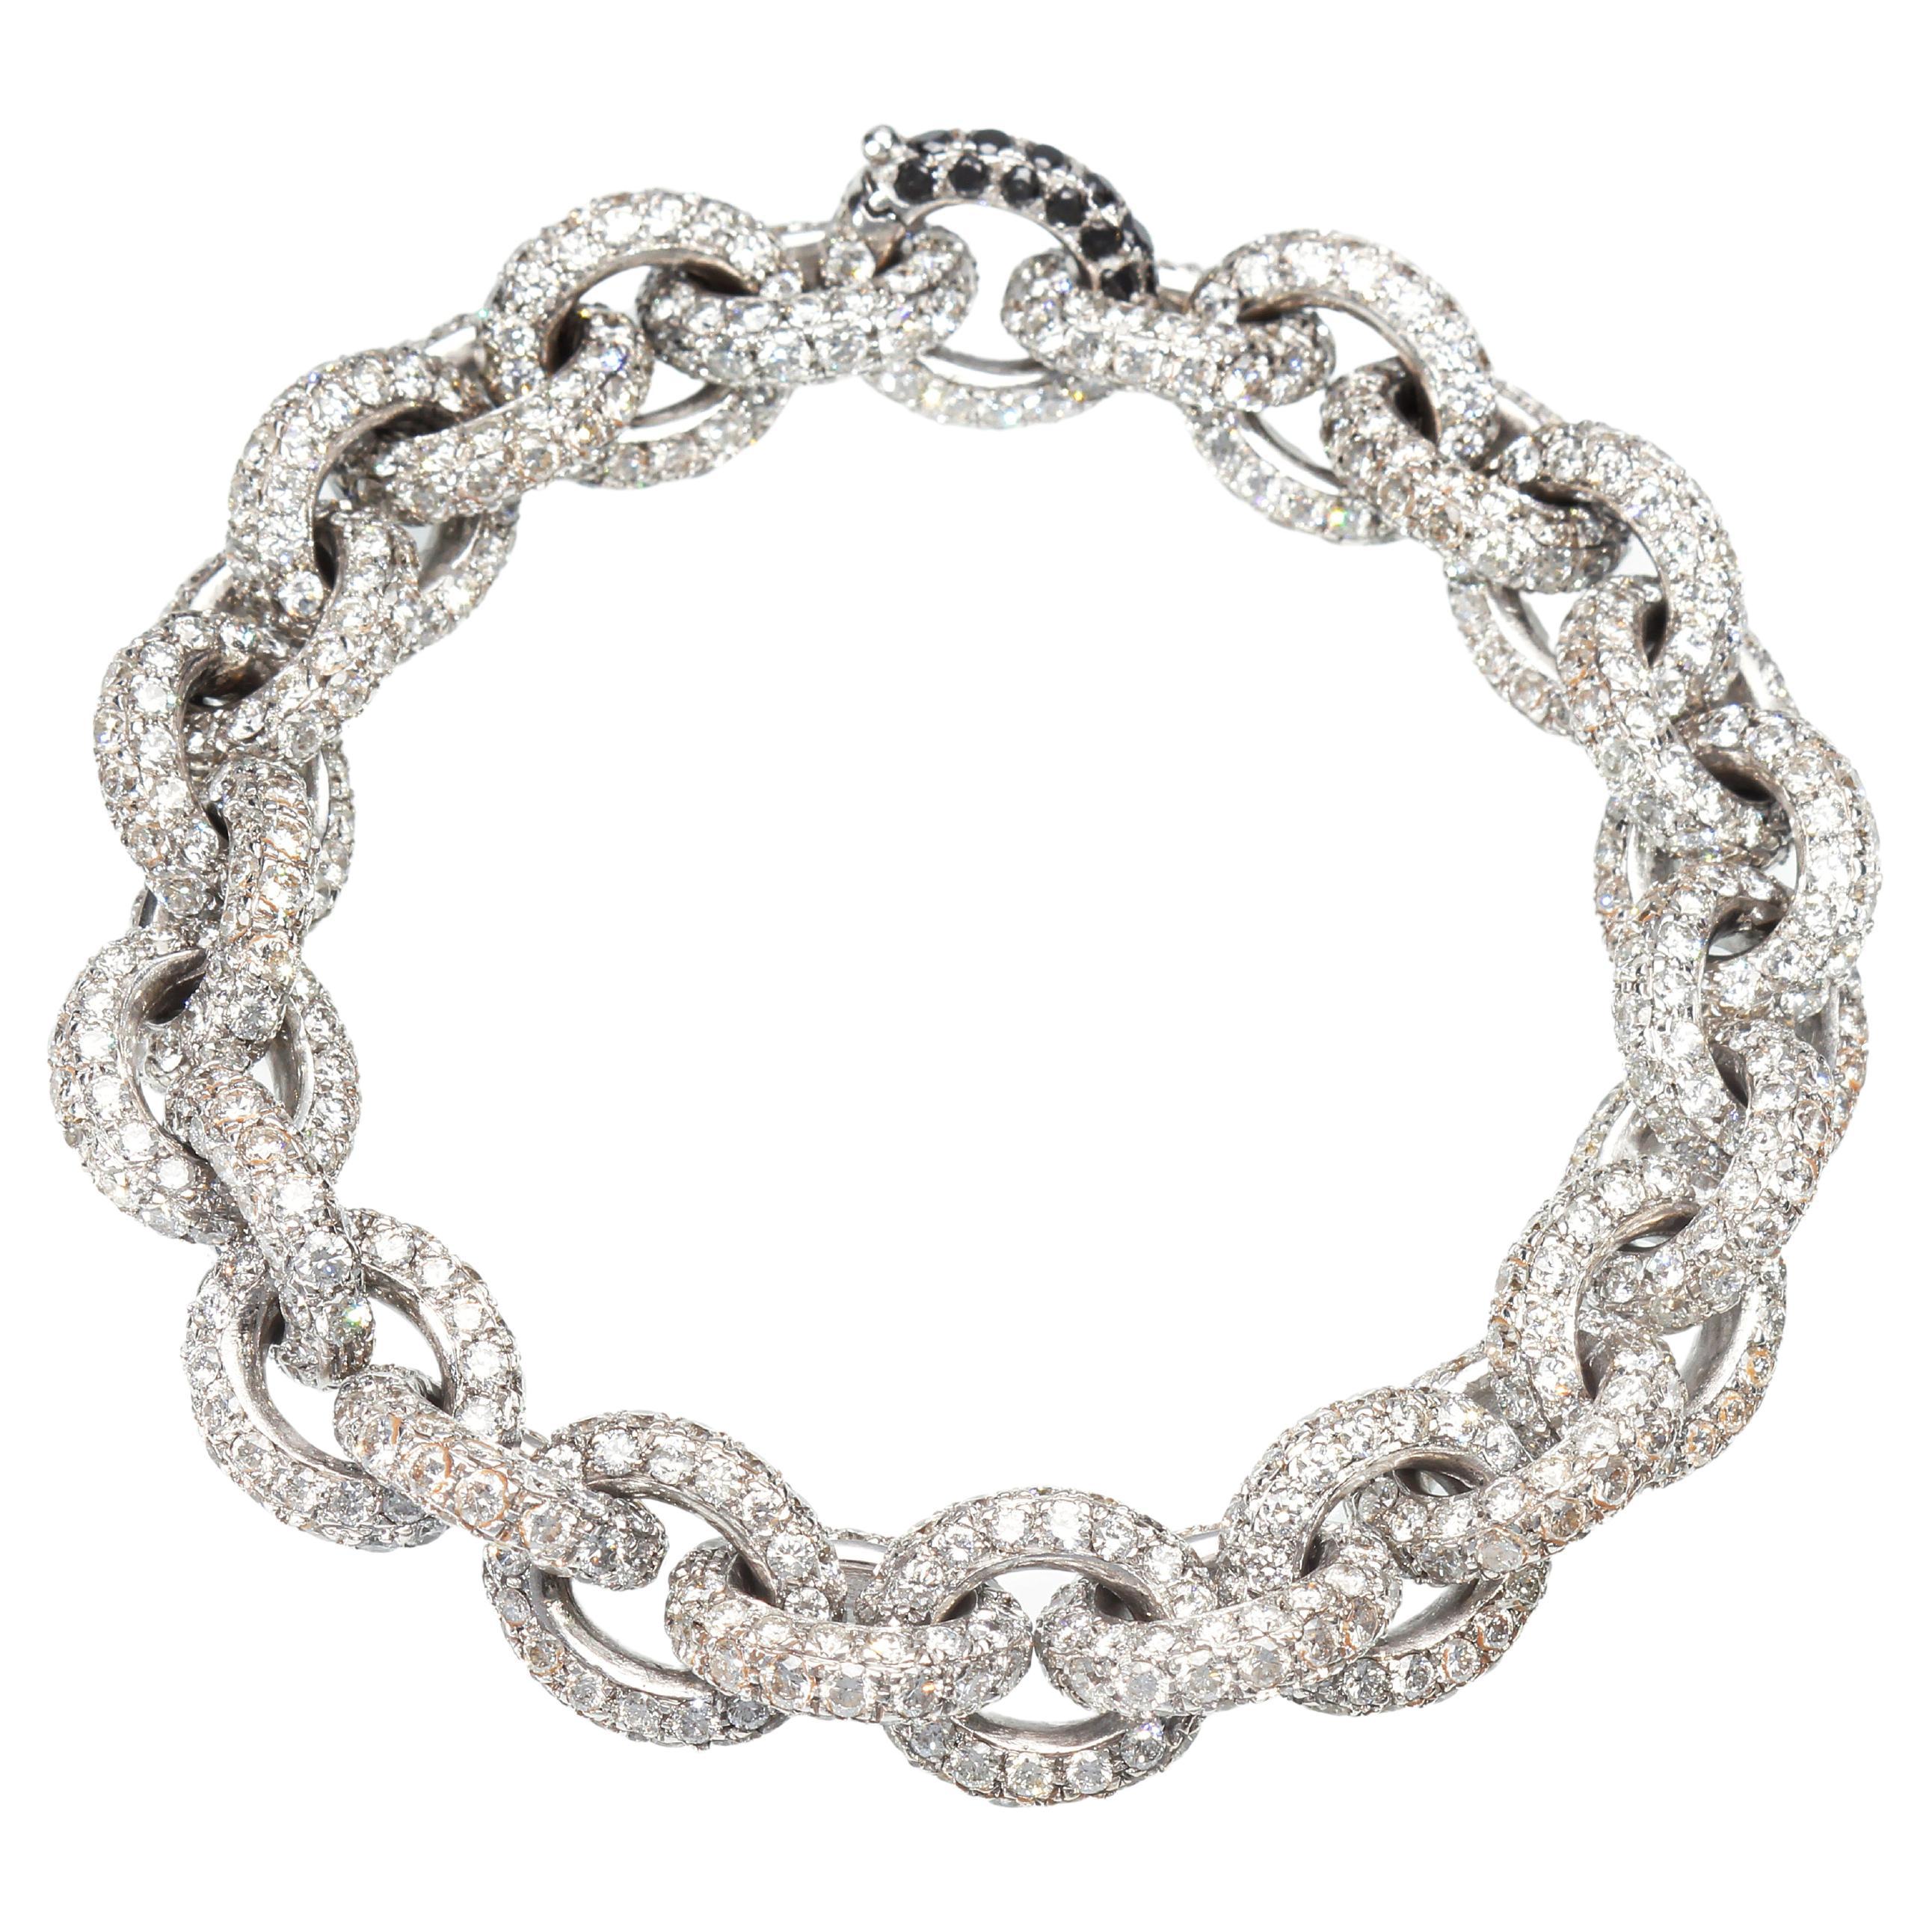 Chain Bracelet with 30.76 Ct of White Diamonds. Handmade. Made in Italy